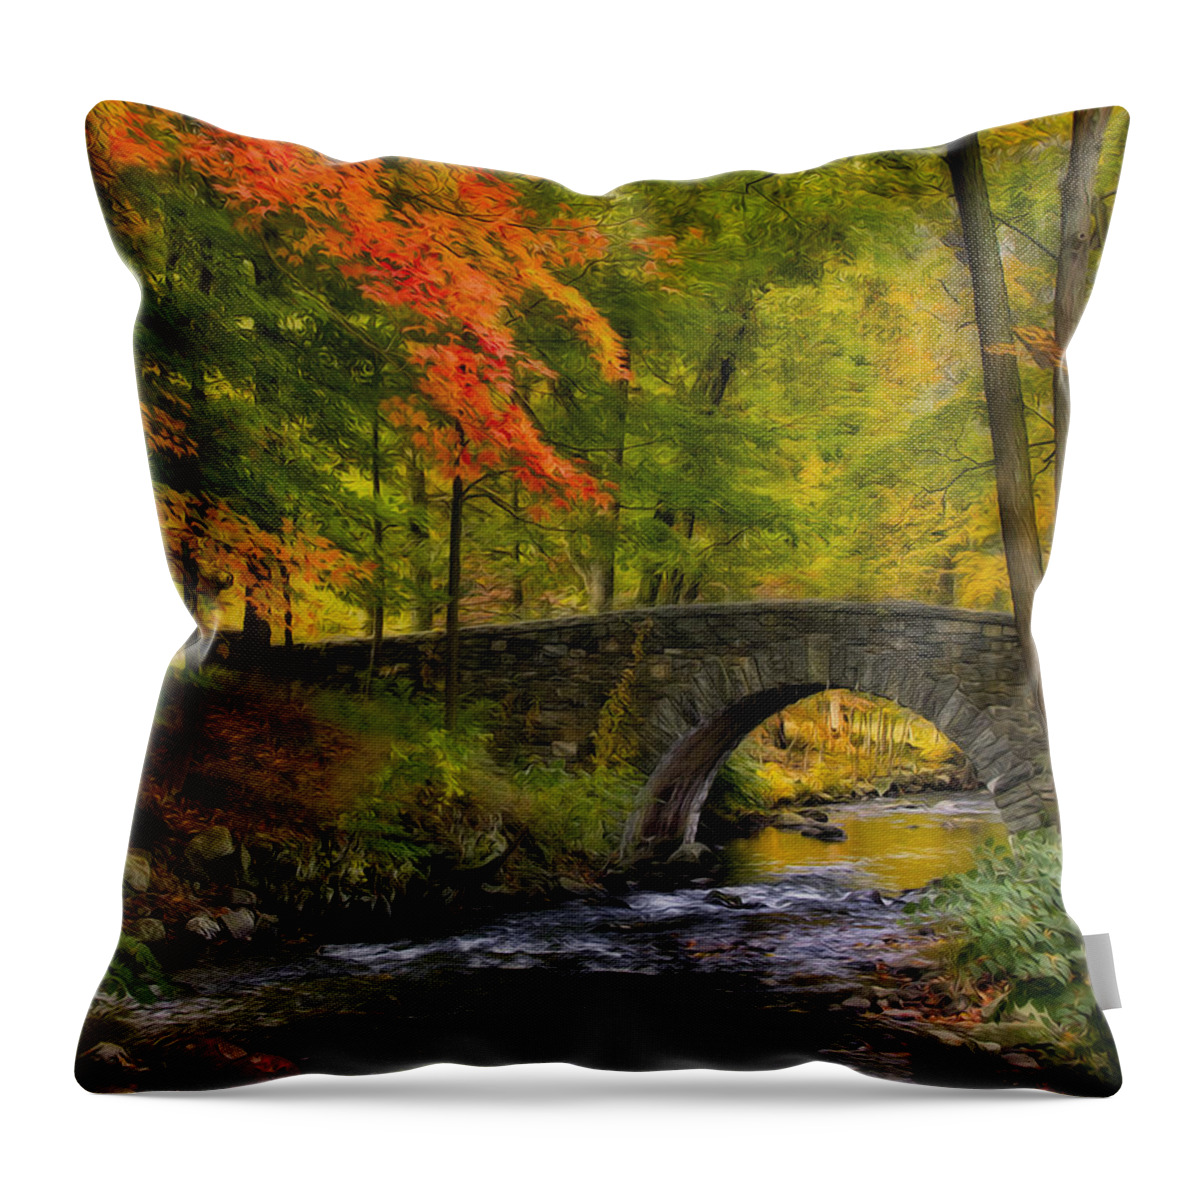 Autumn Throw Pillow featuring the photograph Natures Way by Susan Candelario